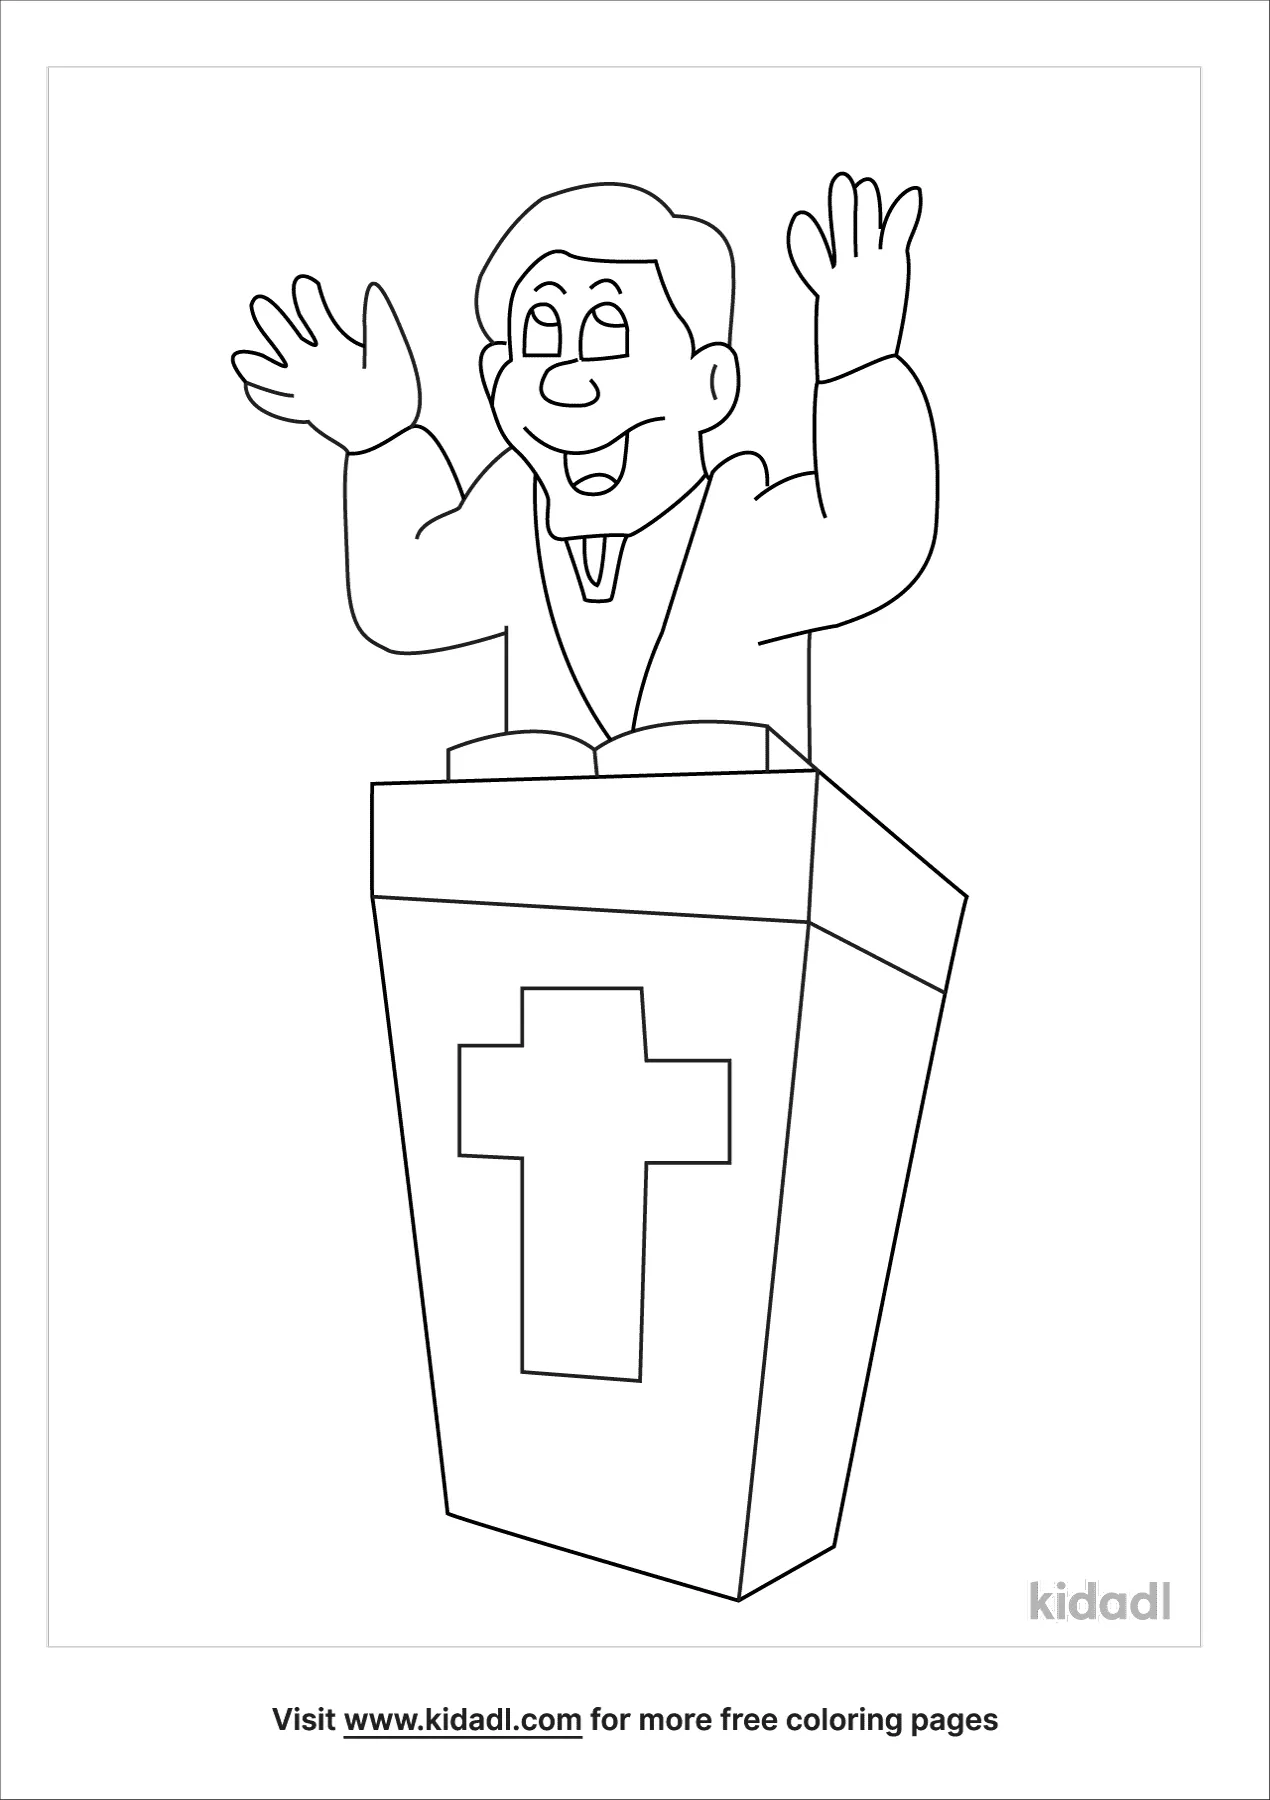 Preacher Coloring Page | Free Jobs Coloring Page | Kidadl